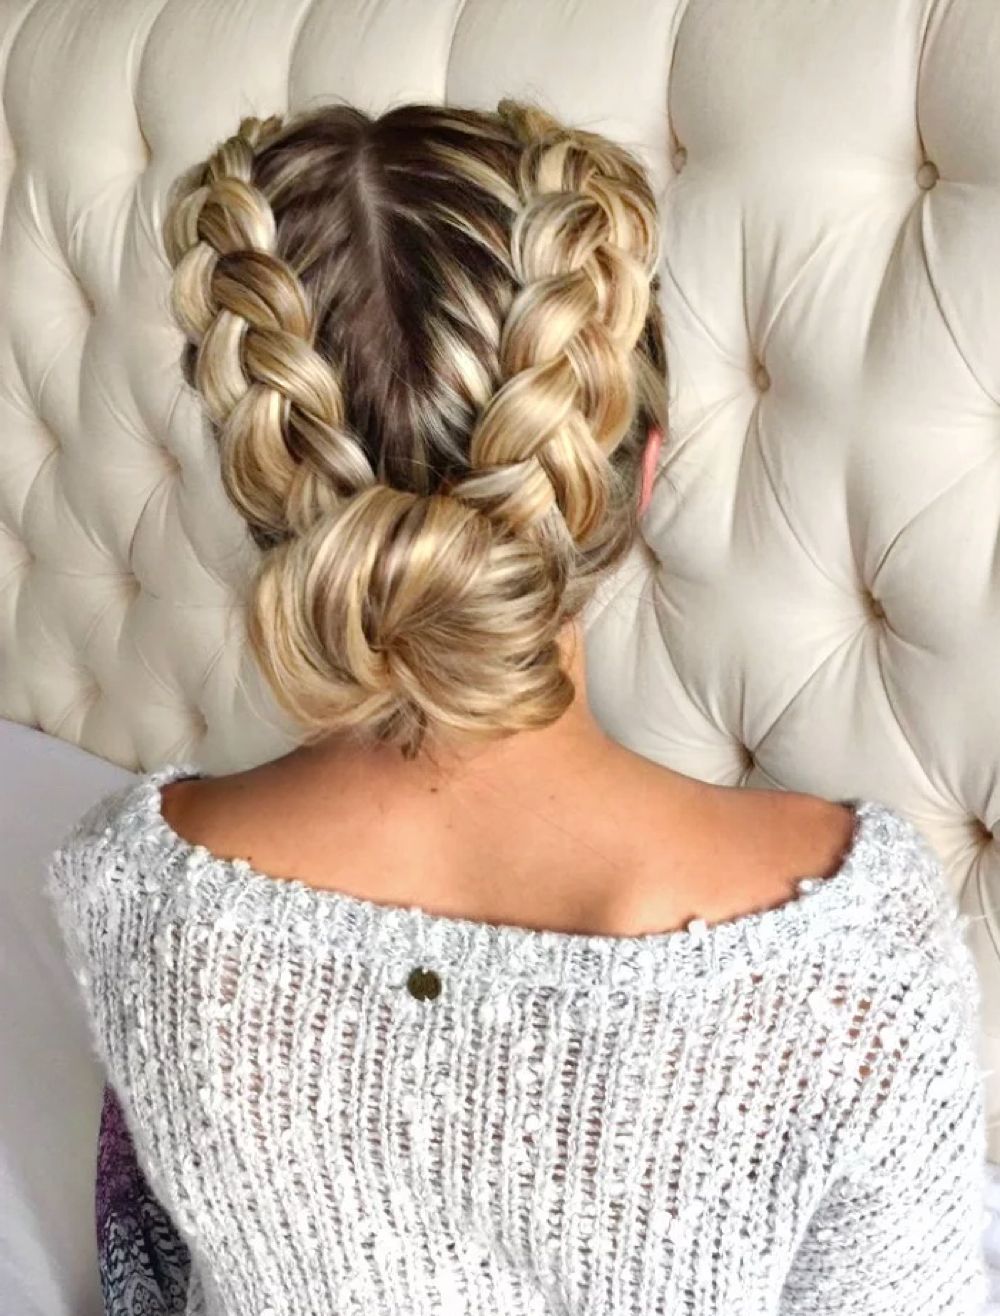 Widely Used Vintage Inspired Braided Updo Hairstyles Throughout 29 Gorgeous Braided Updo Ideas For 2019 (Gallery 10 of 20)